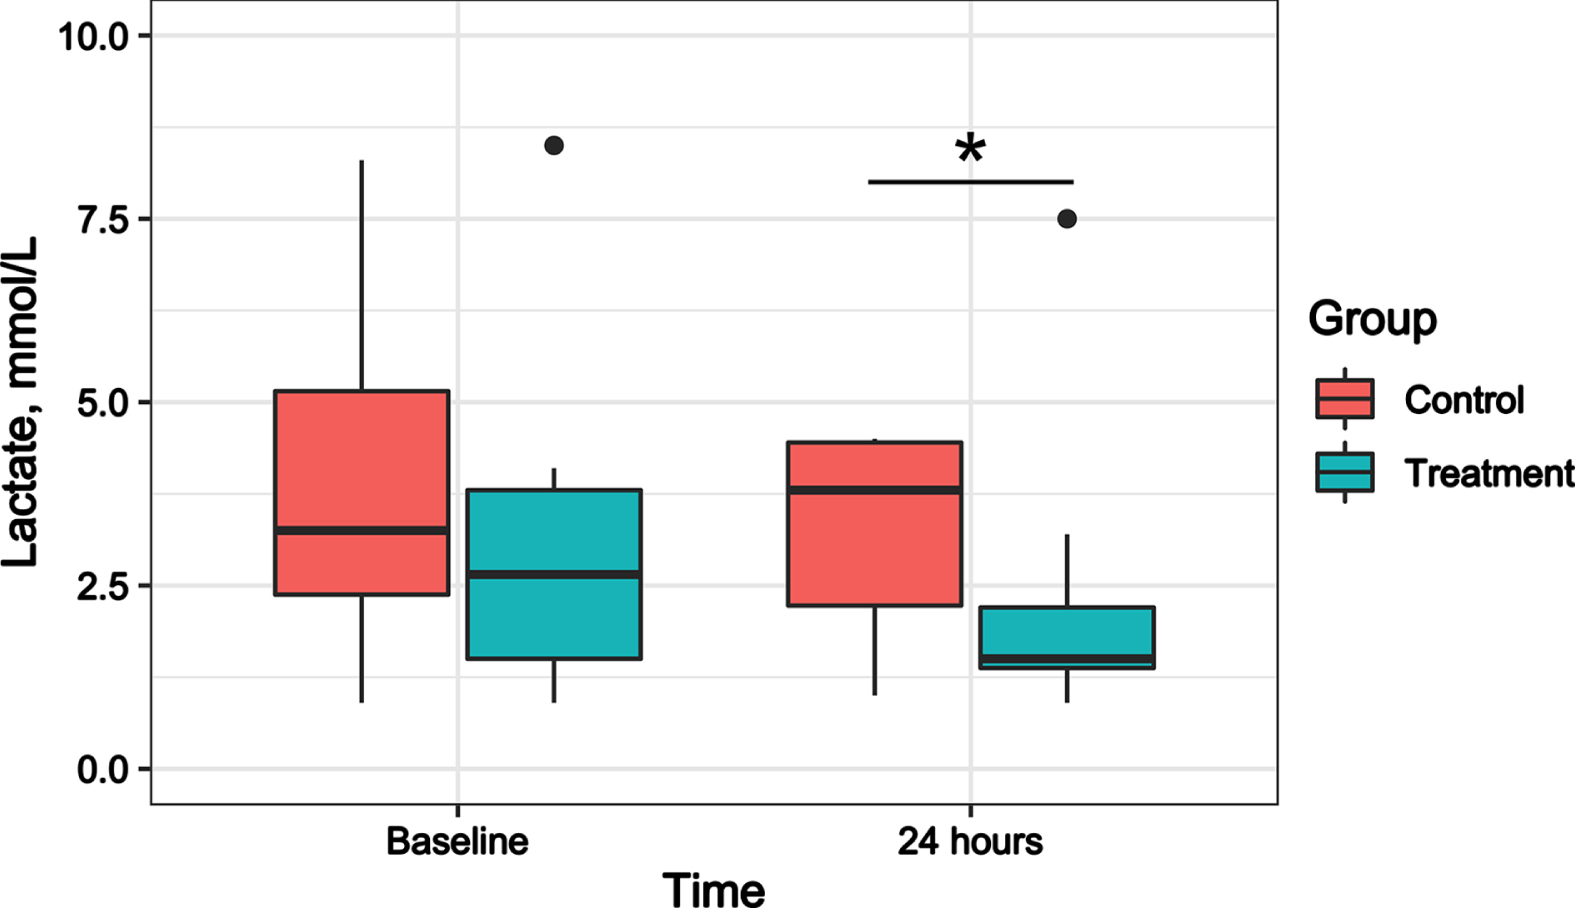 Effect of hydrocortisone combined with vitamin C and Vitamin B1 versus hydrocortisone alone on lactate in septic shock patients. Boxplot indicates median (interquartile range) with maximum and minimum values. *Compared with the control group, P < 0.05.